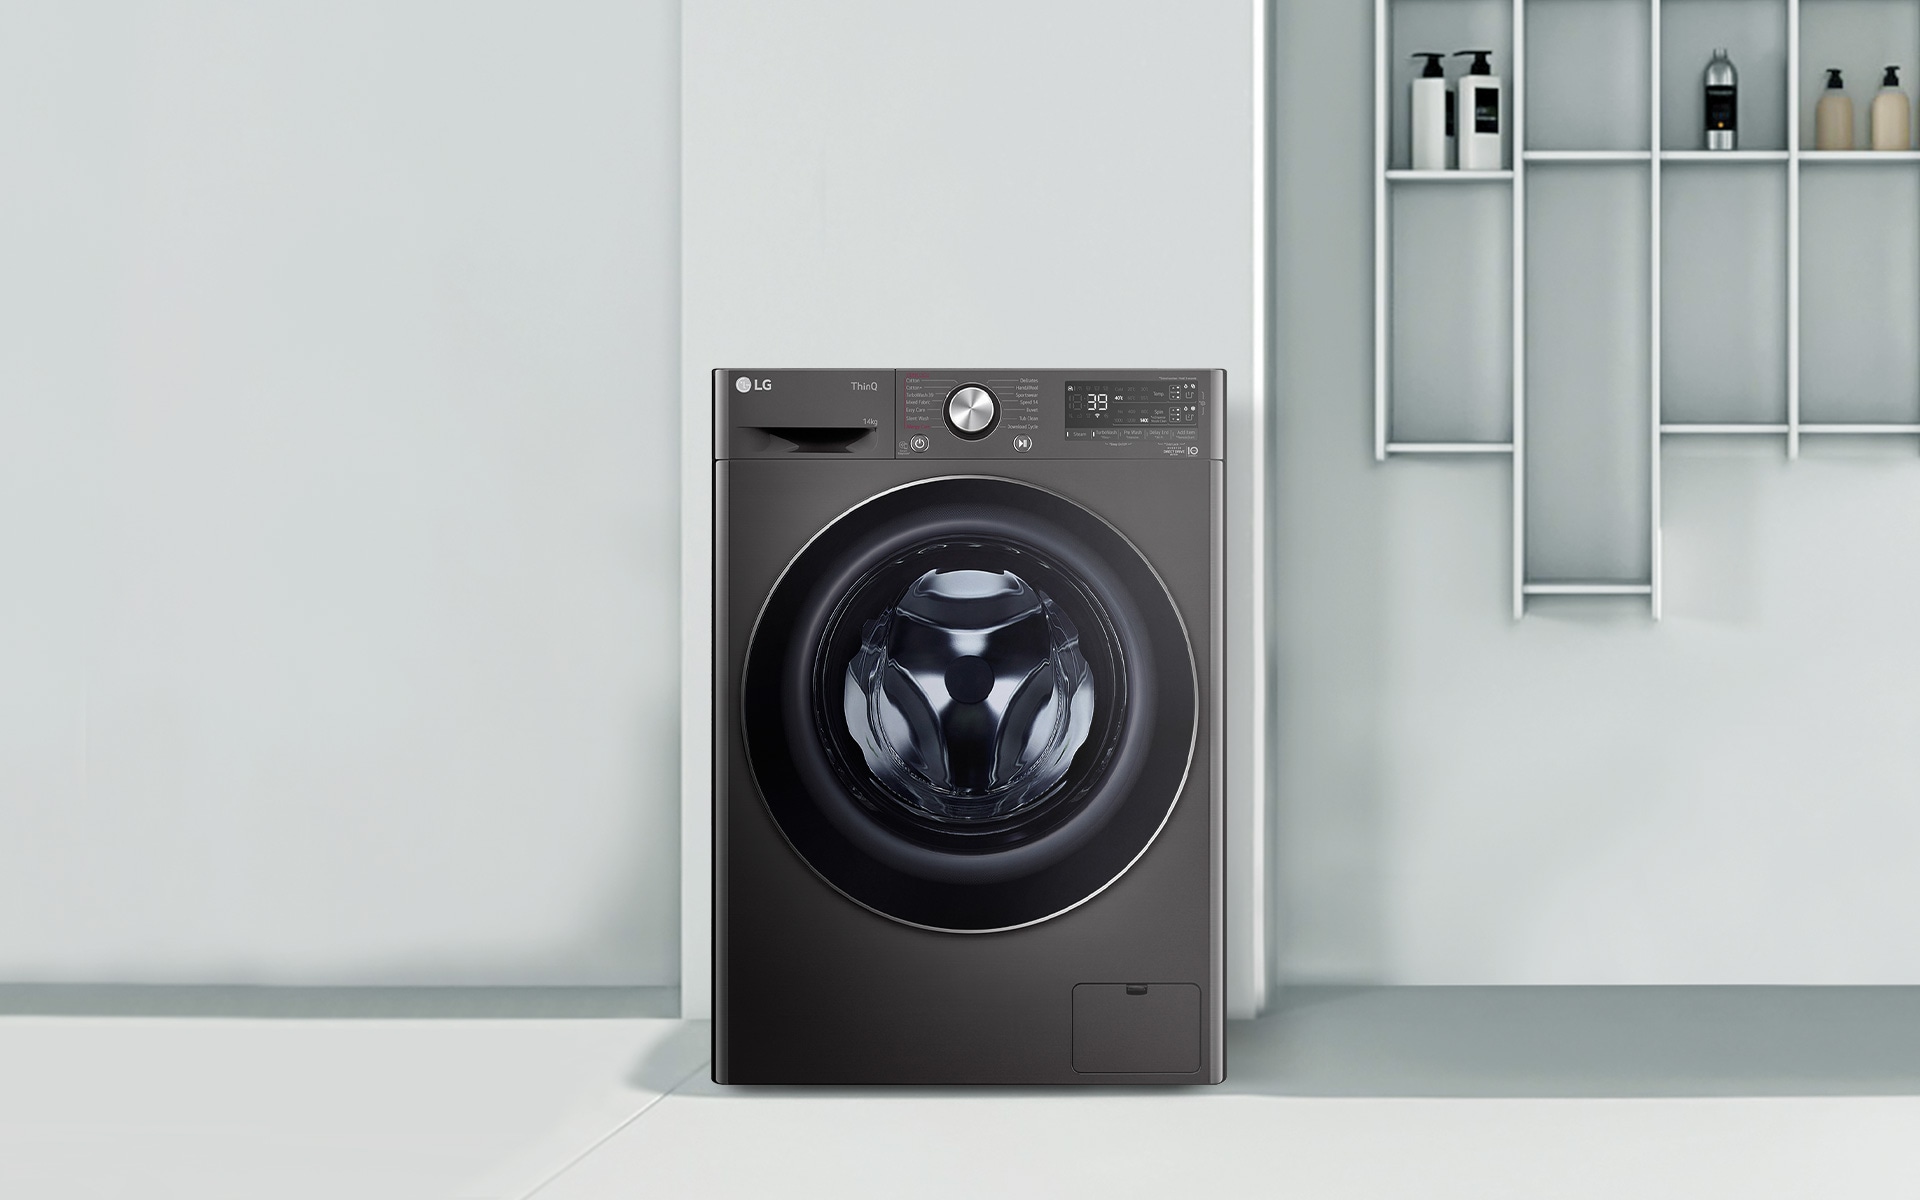 Laundry Tips: How to Use Your Washing Machine